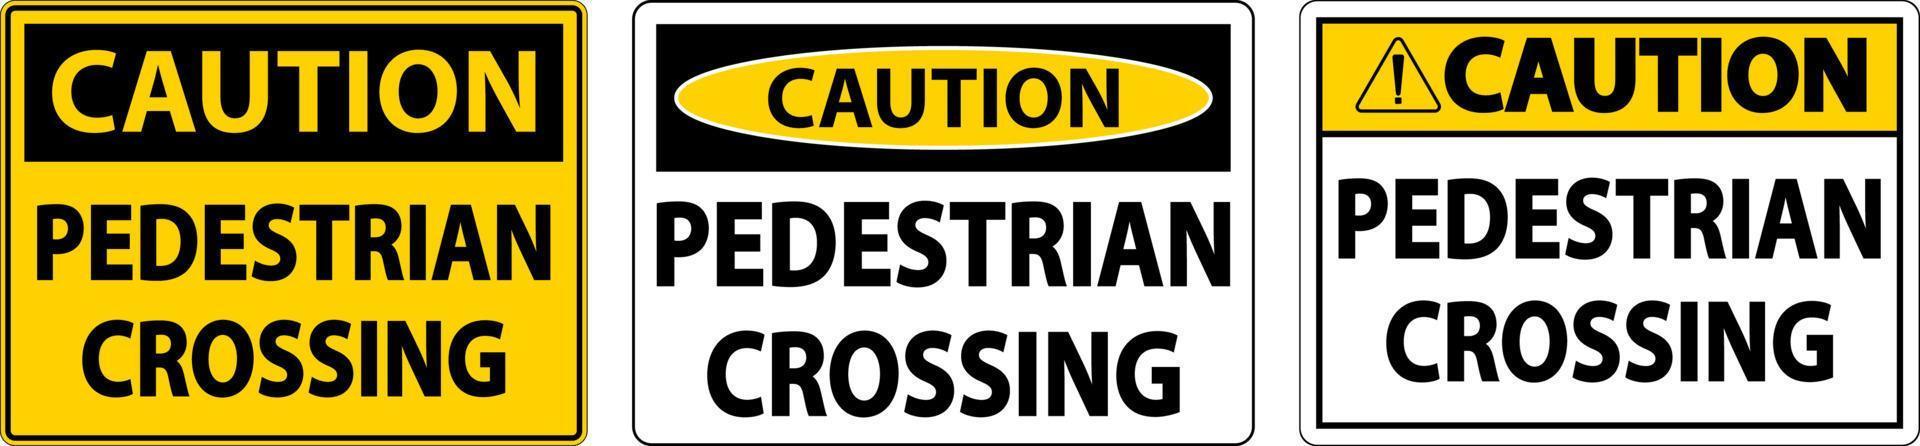 Caution Pedestrian Crossing Sign On White Background vector